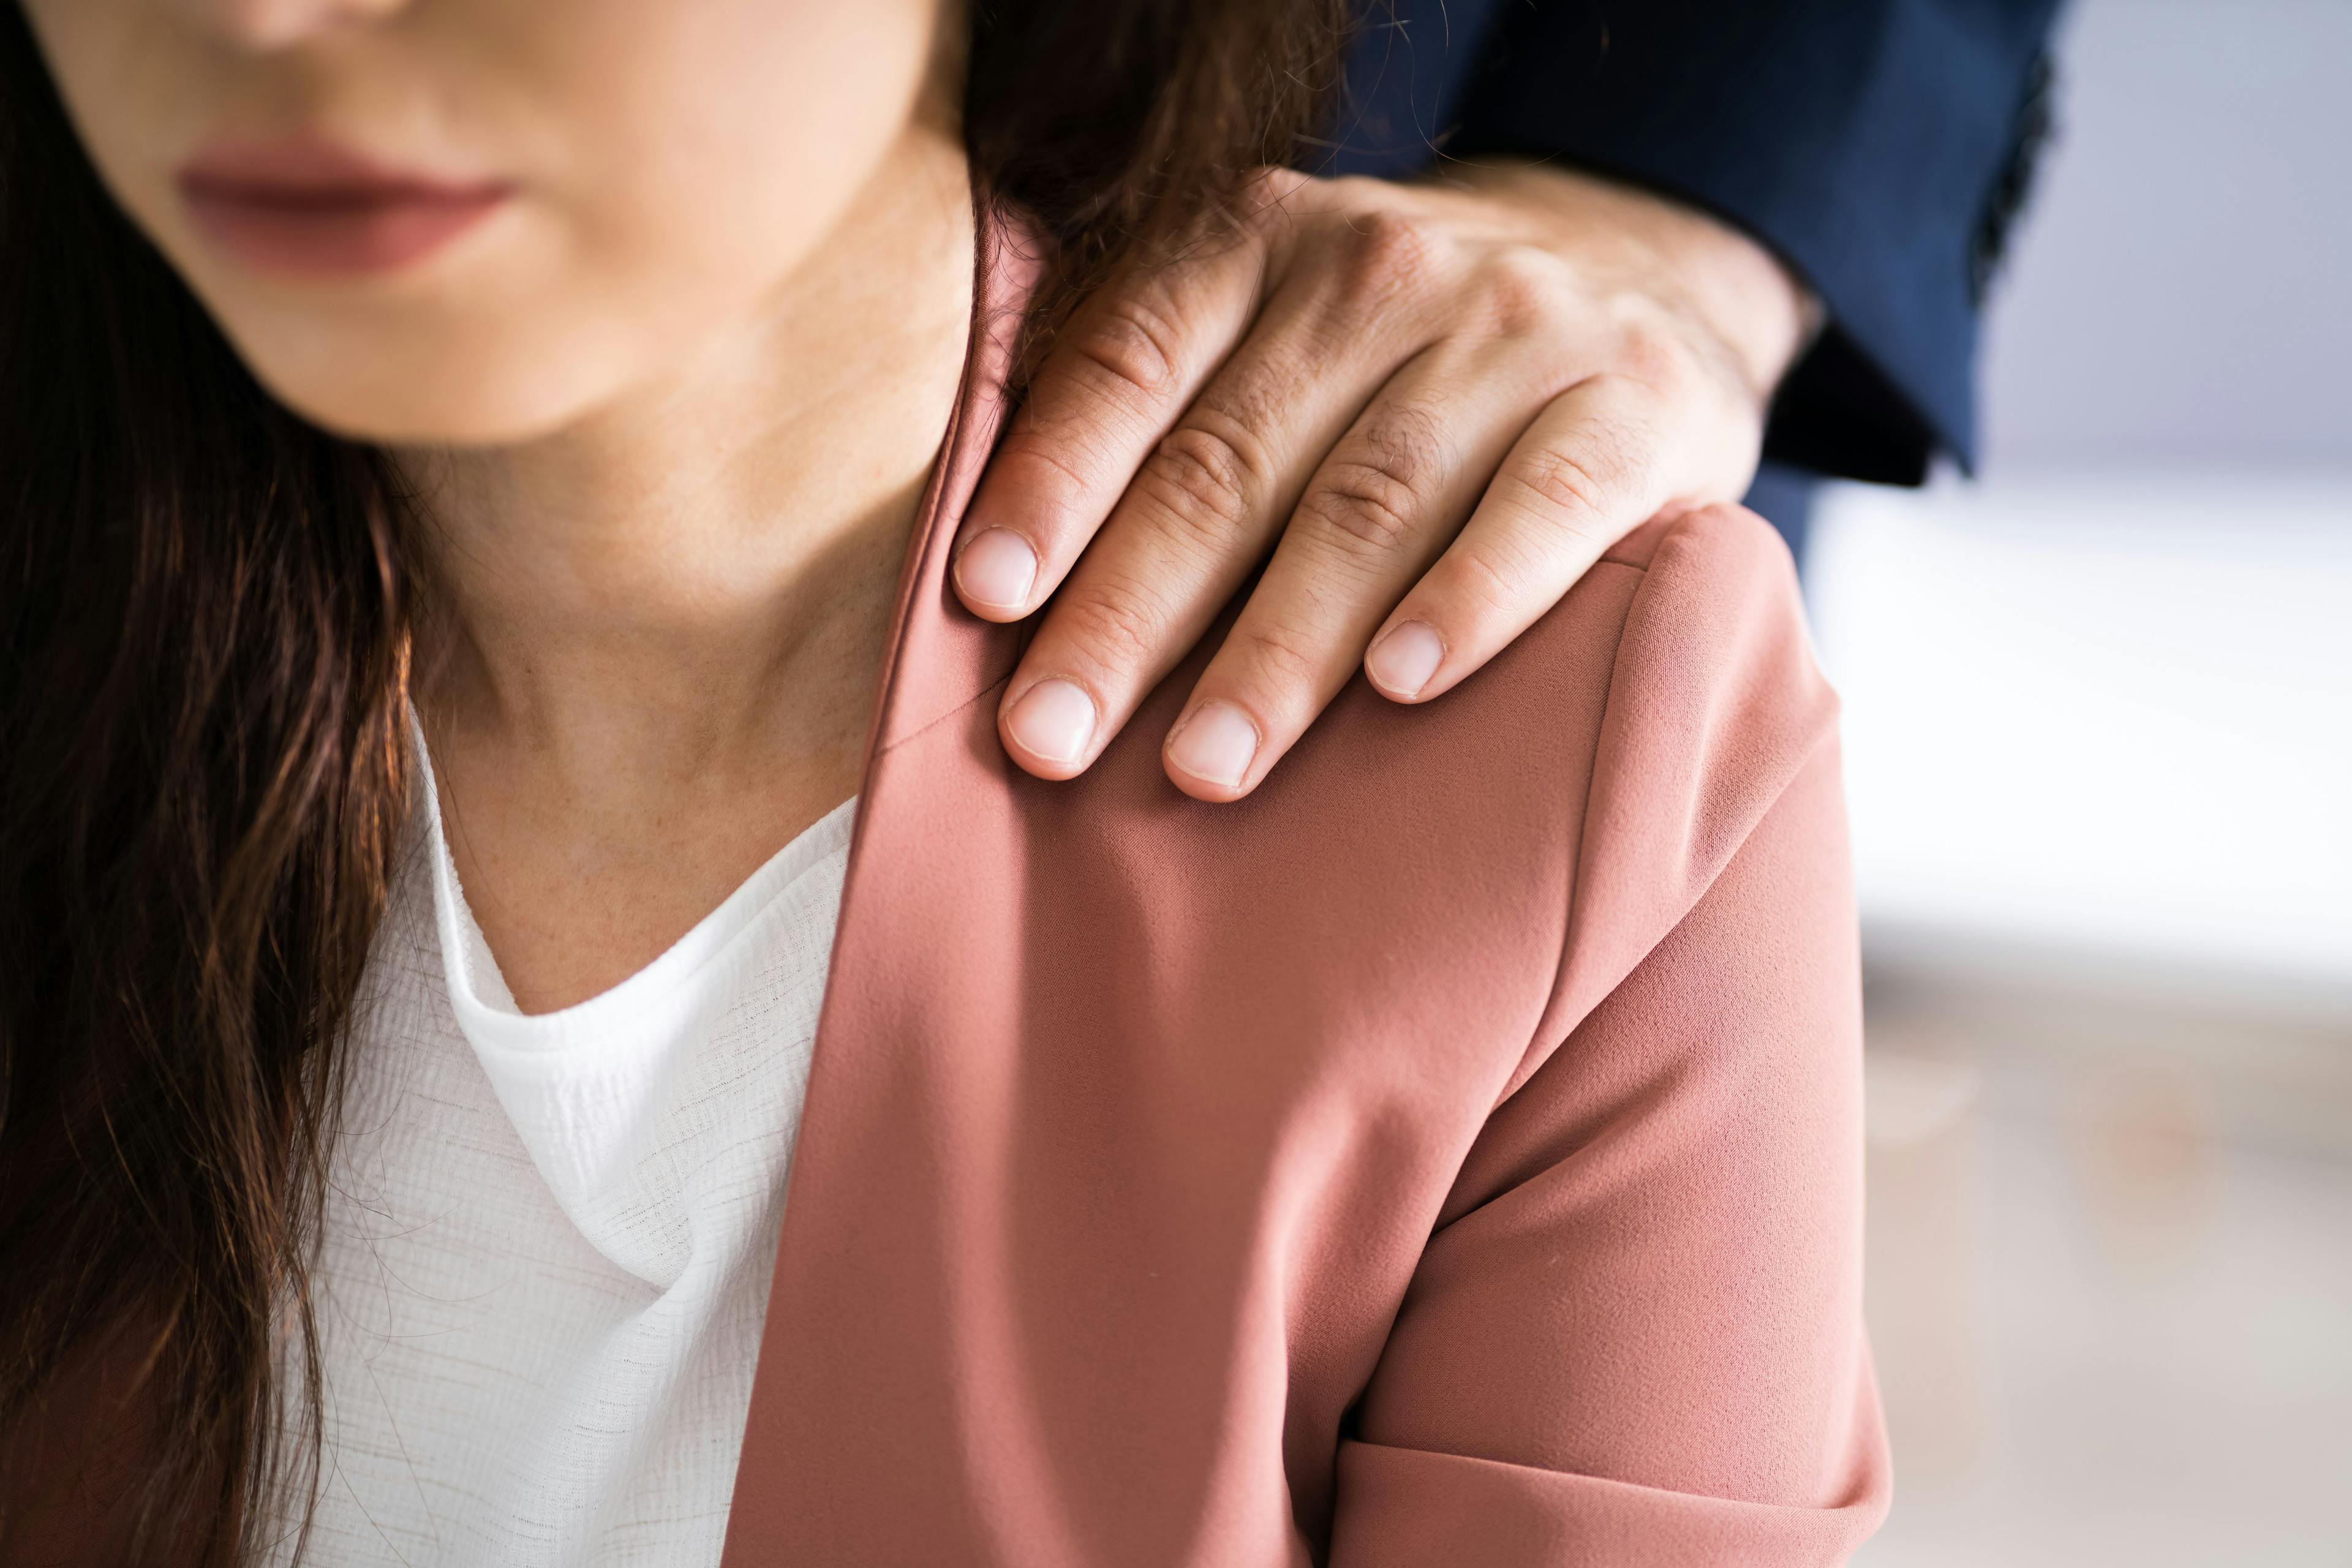 Sexual Assault, Workplace Harassment Raises Hypertension Risk in Middle-aged Women